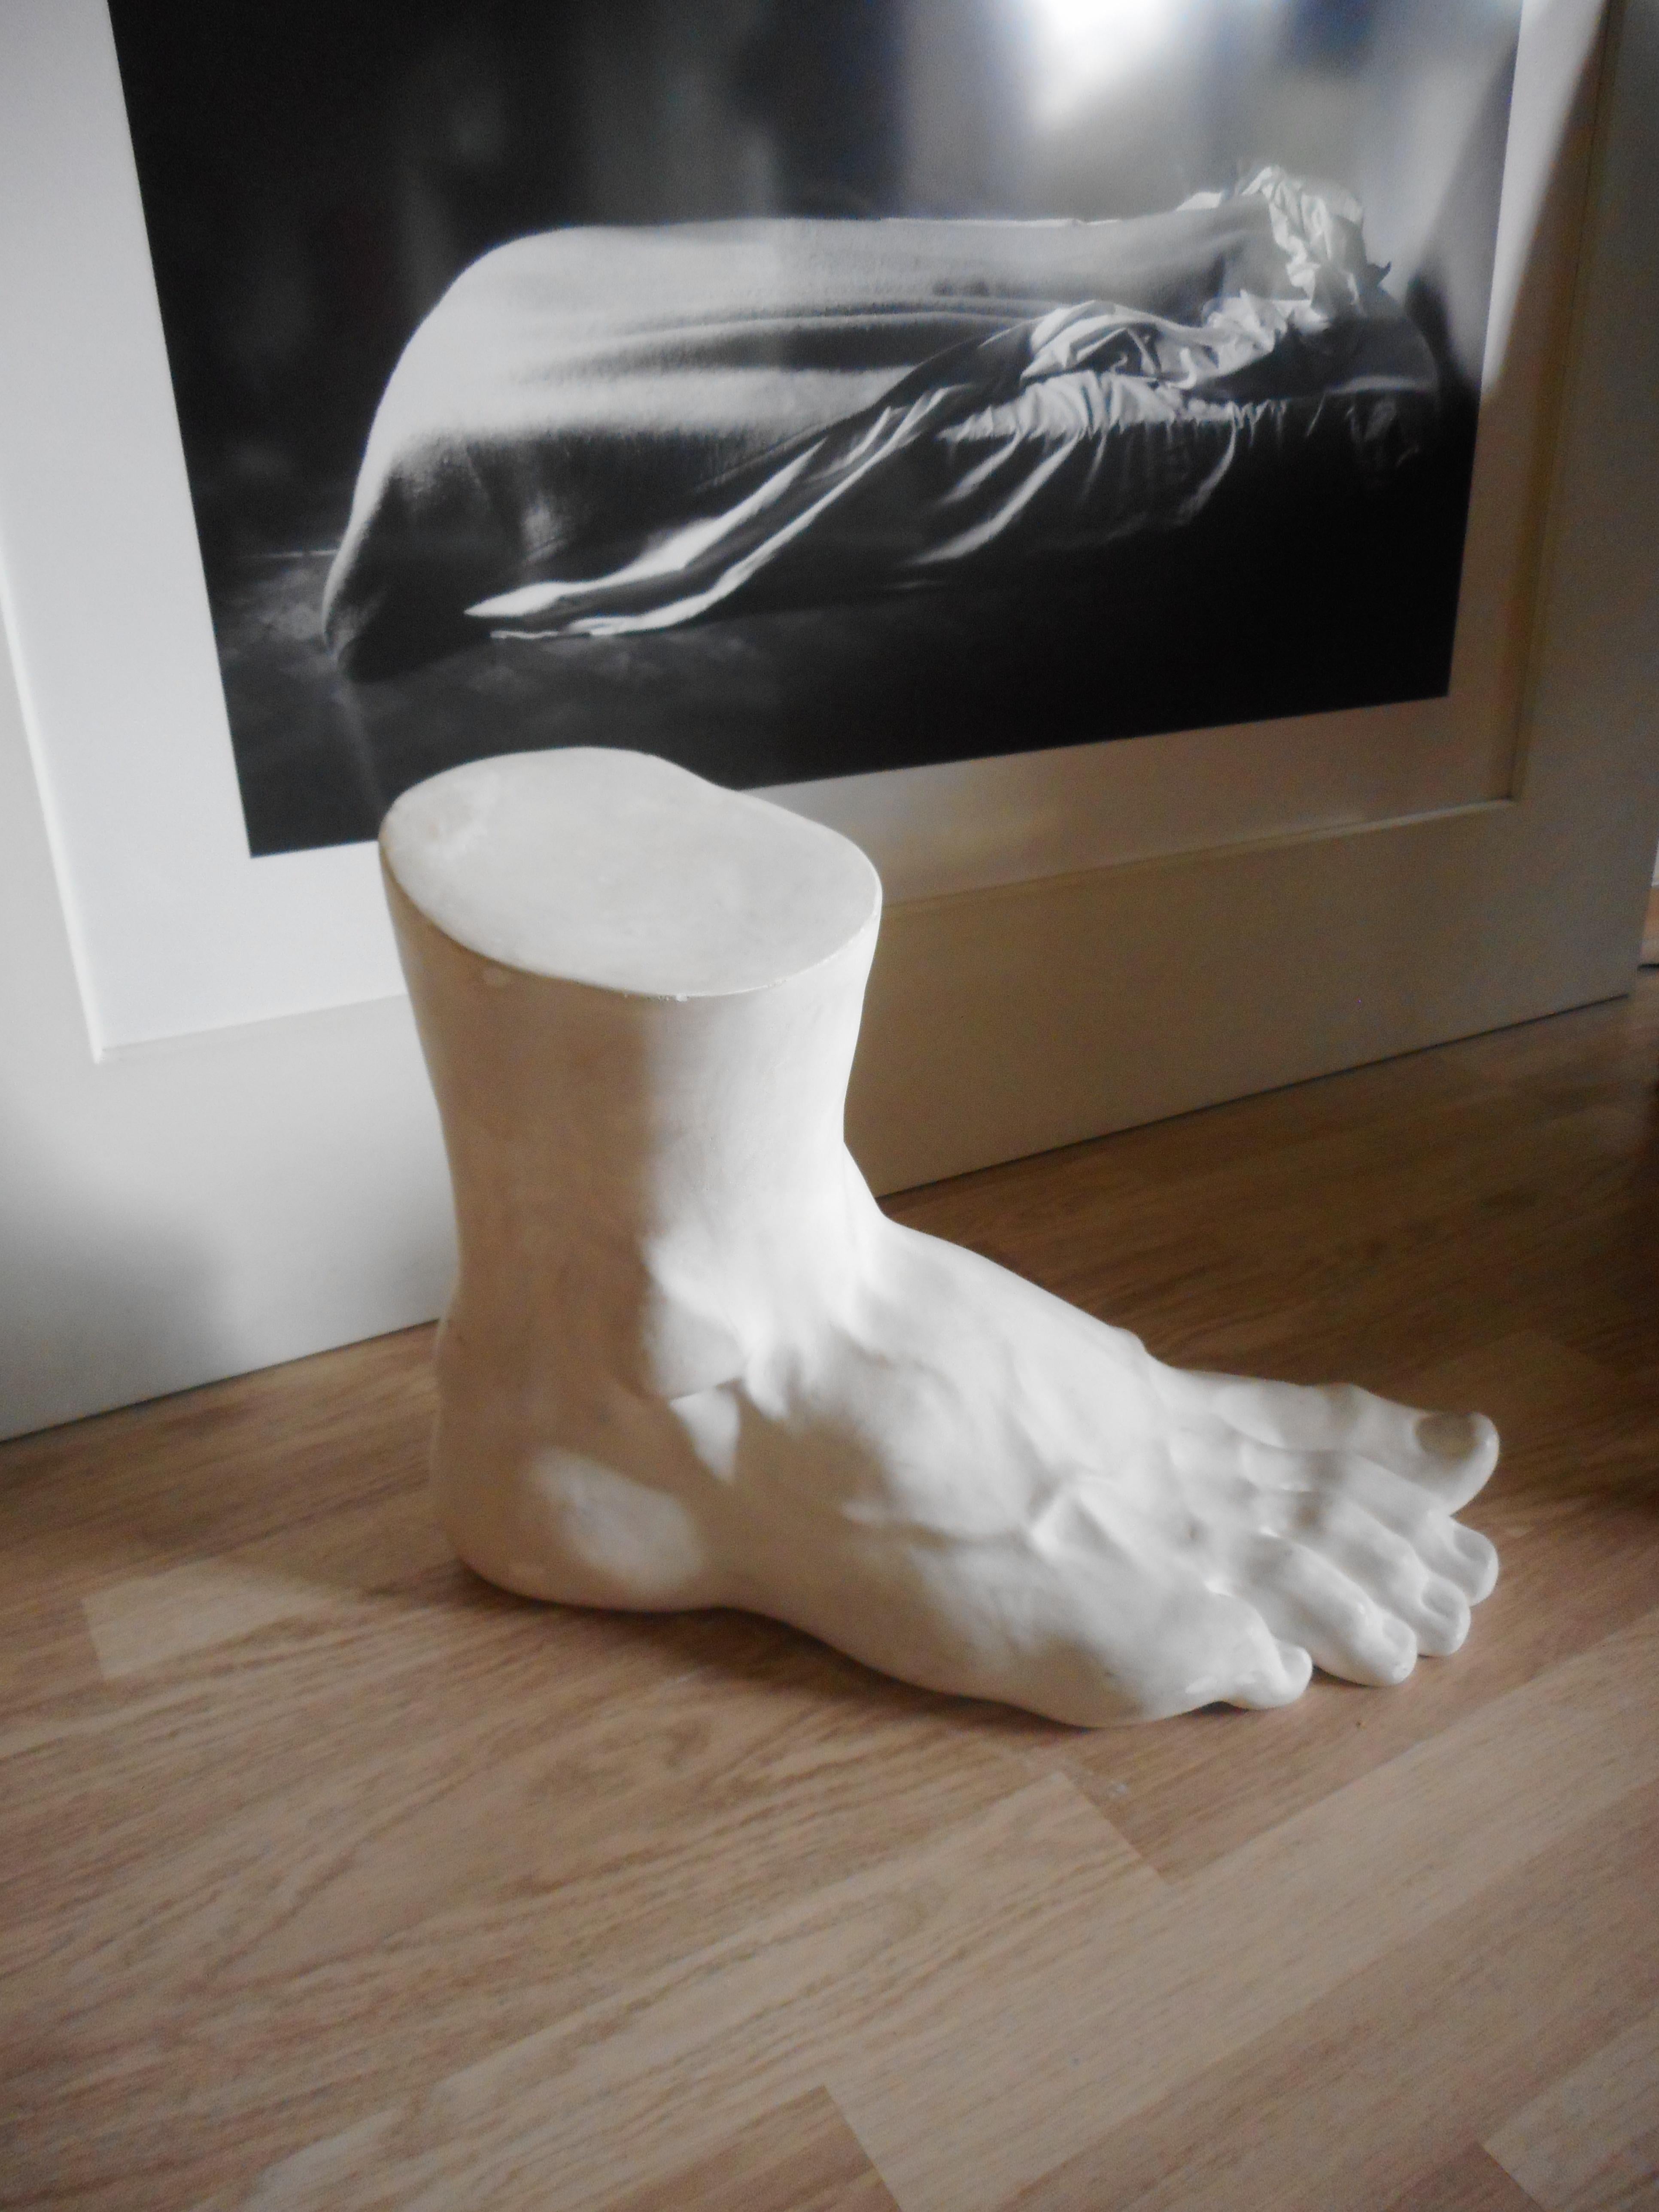 Large academic plaster foot (Hercules).
Comes from an old sculptor workshop.
Belgium, 1950.
   